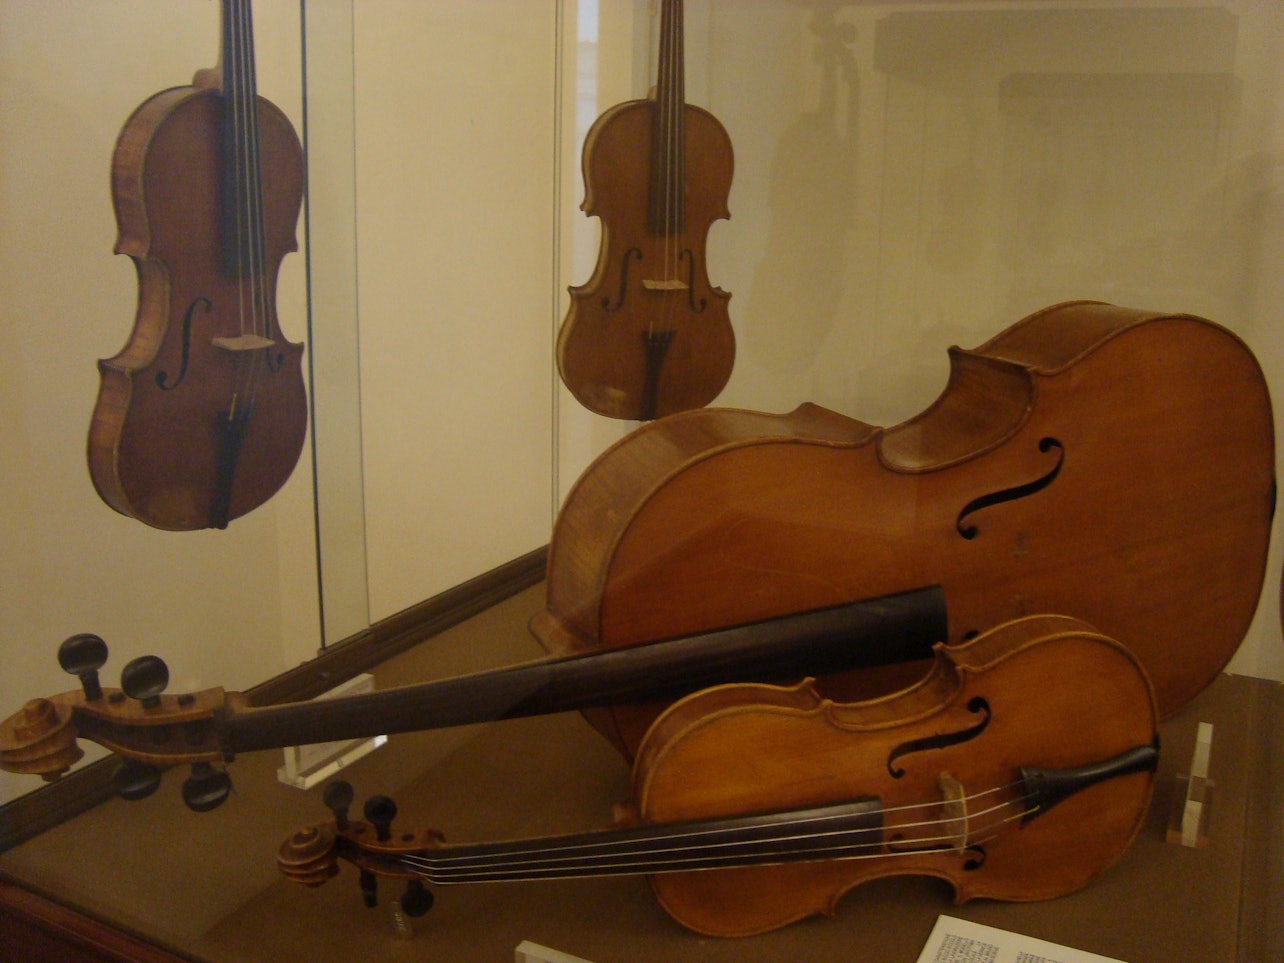 The National Museum of Musical Instruments - Accommodations in Rome